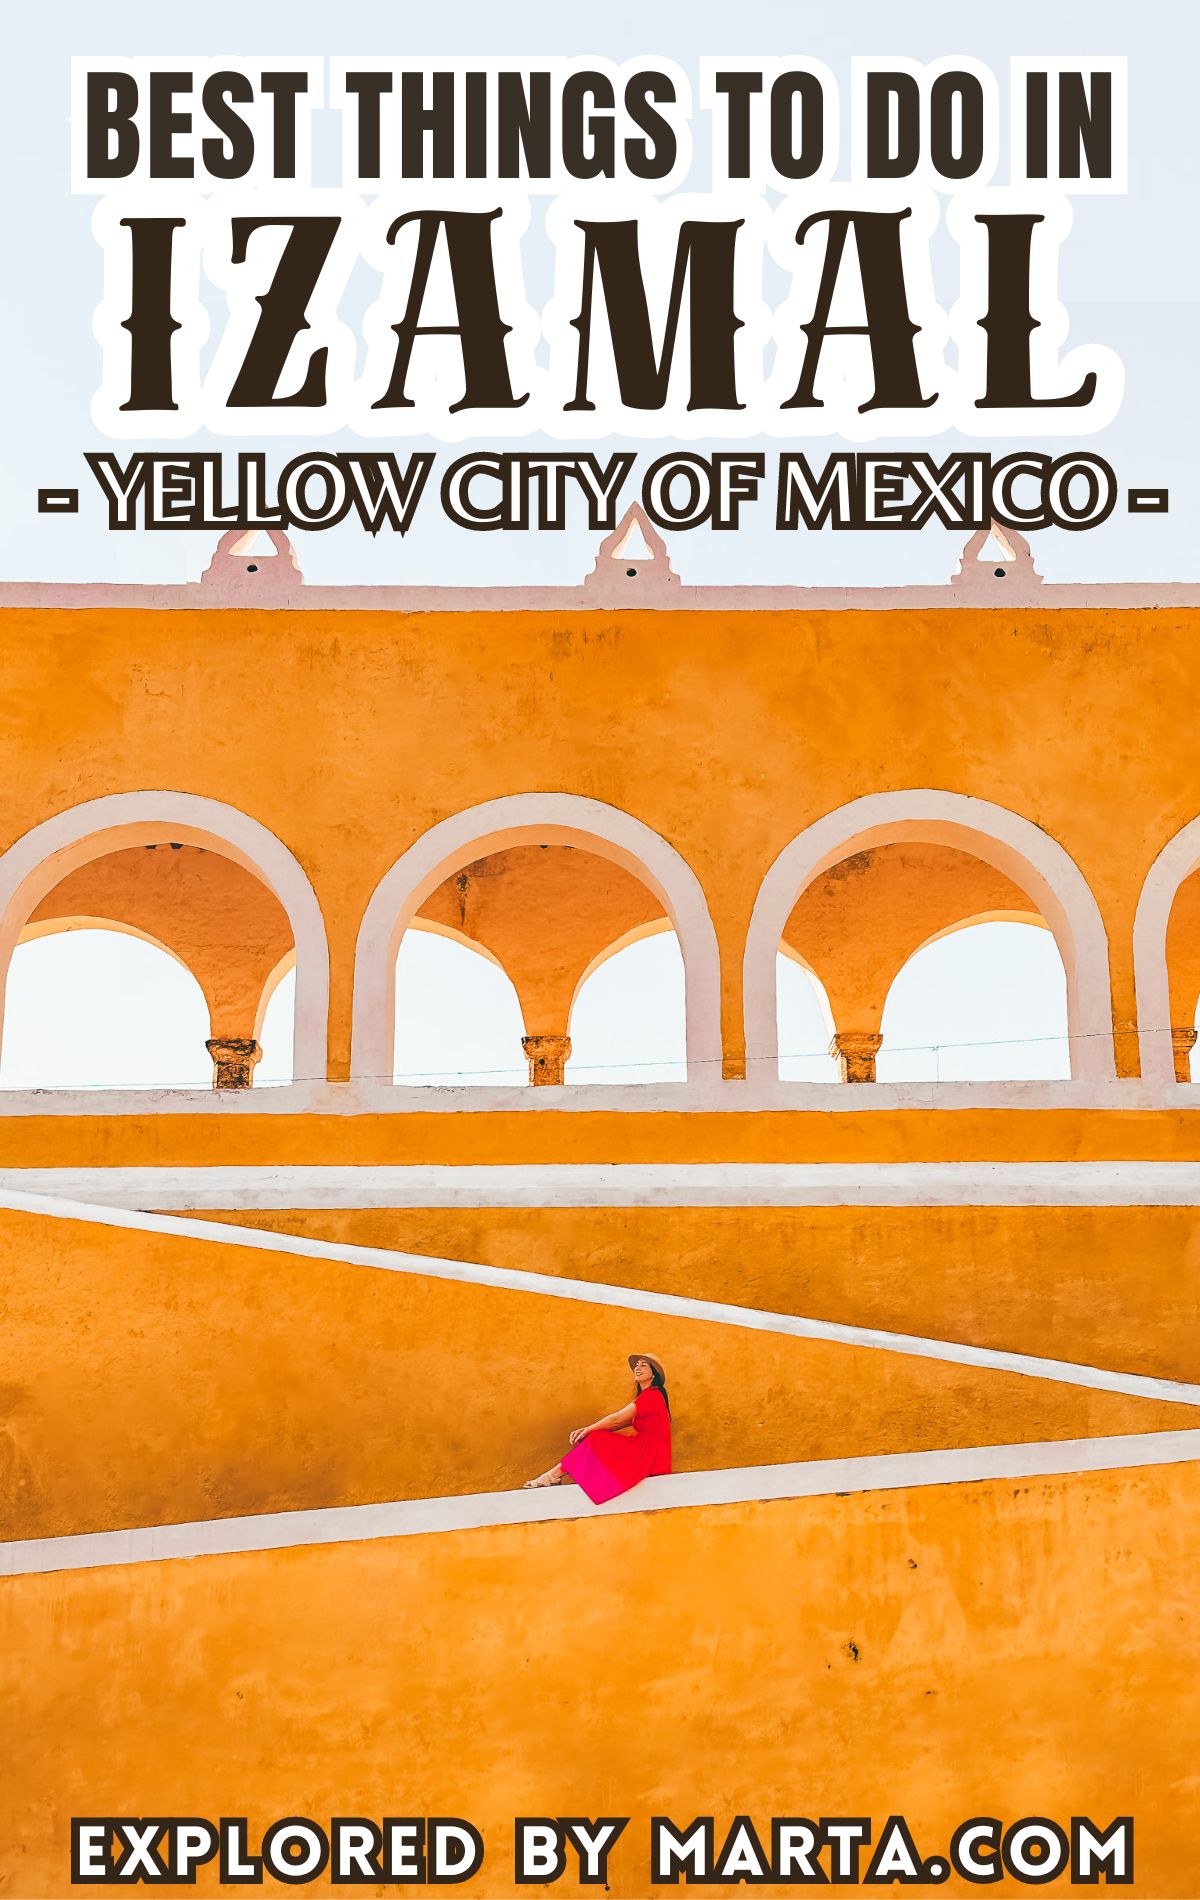 Best things to do in Izamal, Mexico - the Yellow City in the Yucatan Peninsula